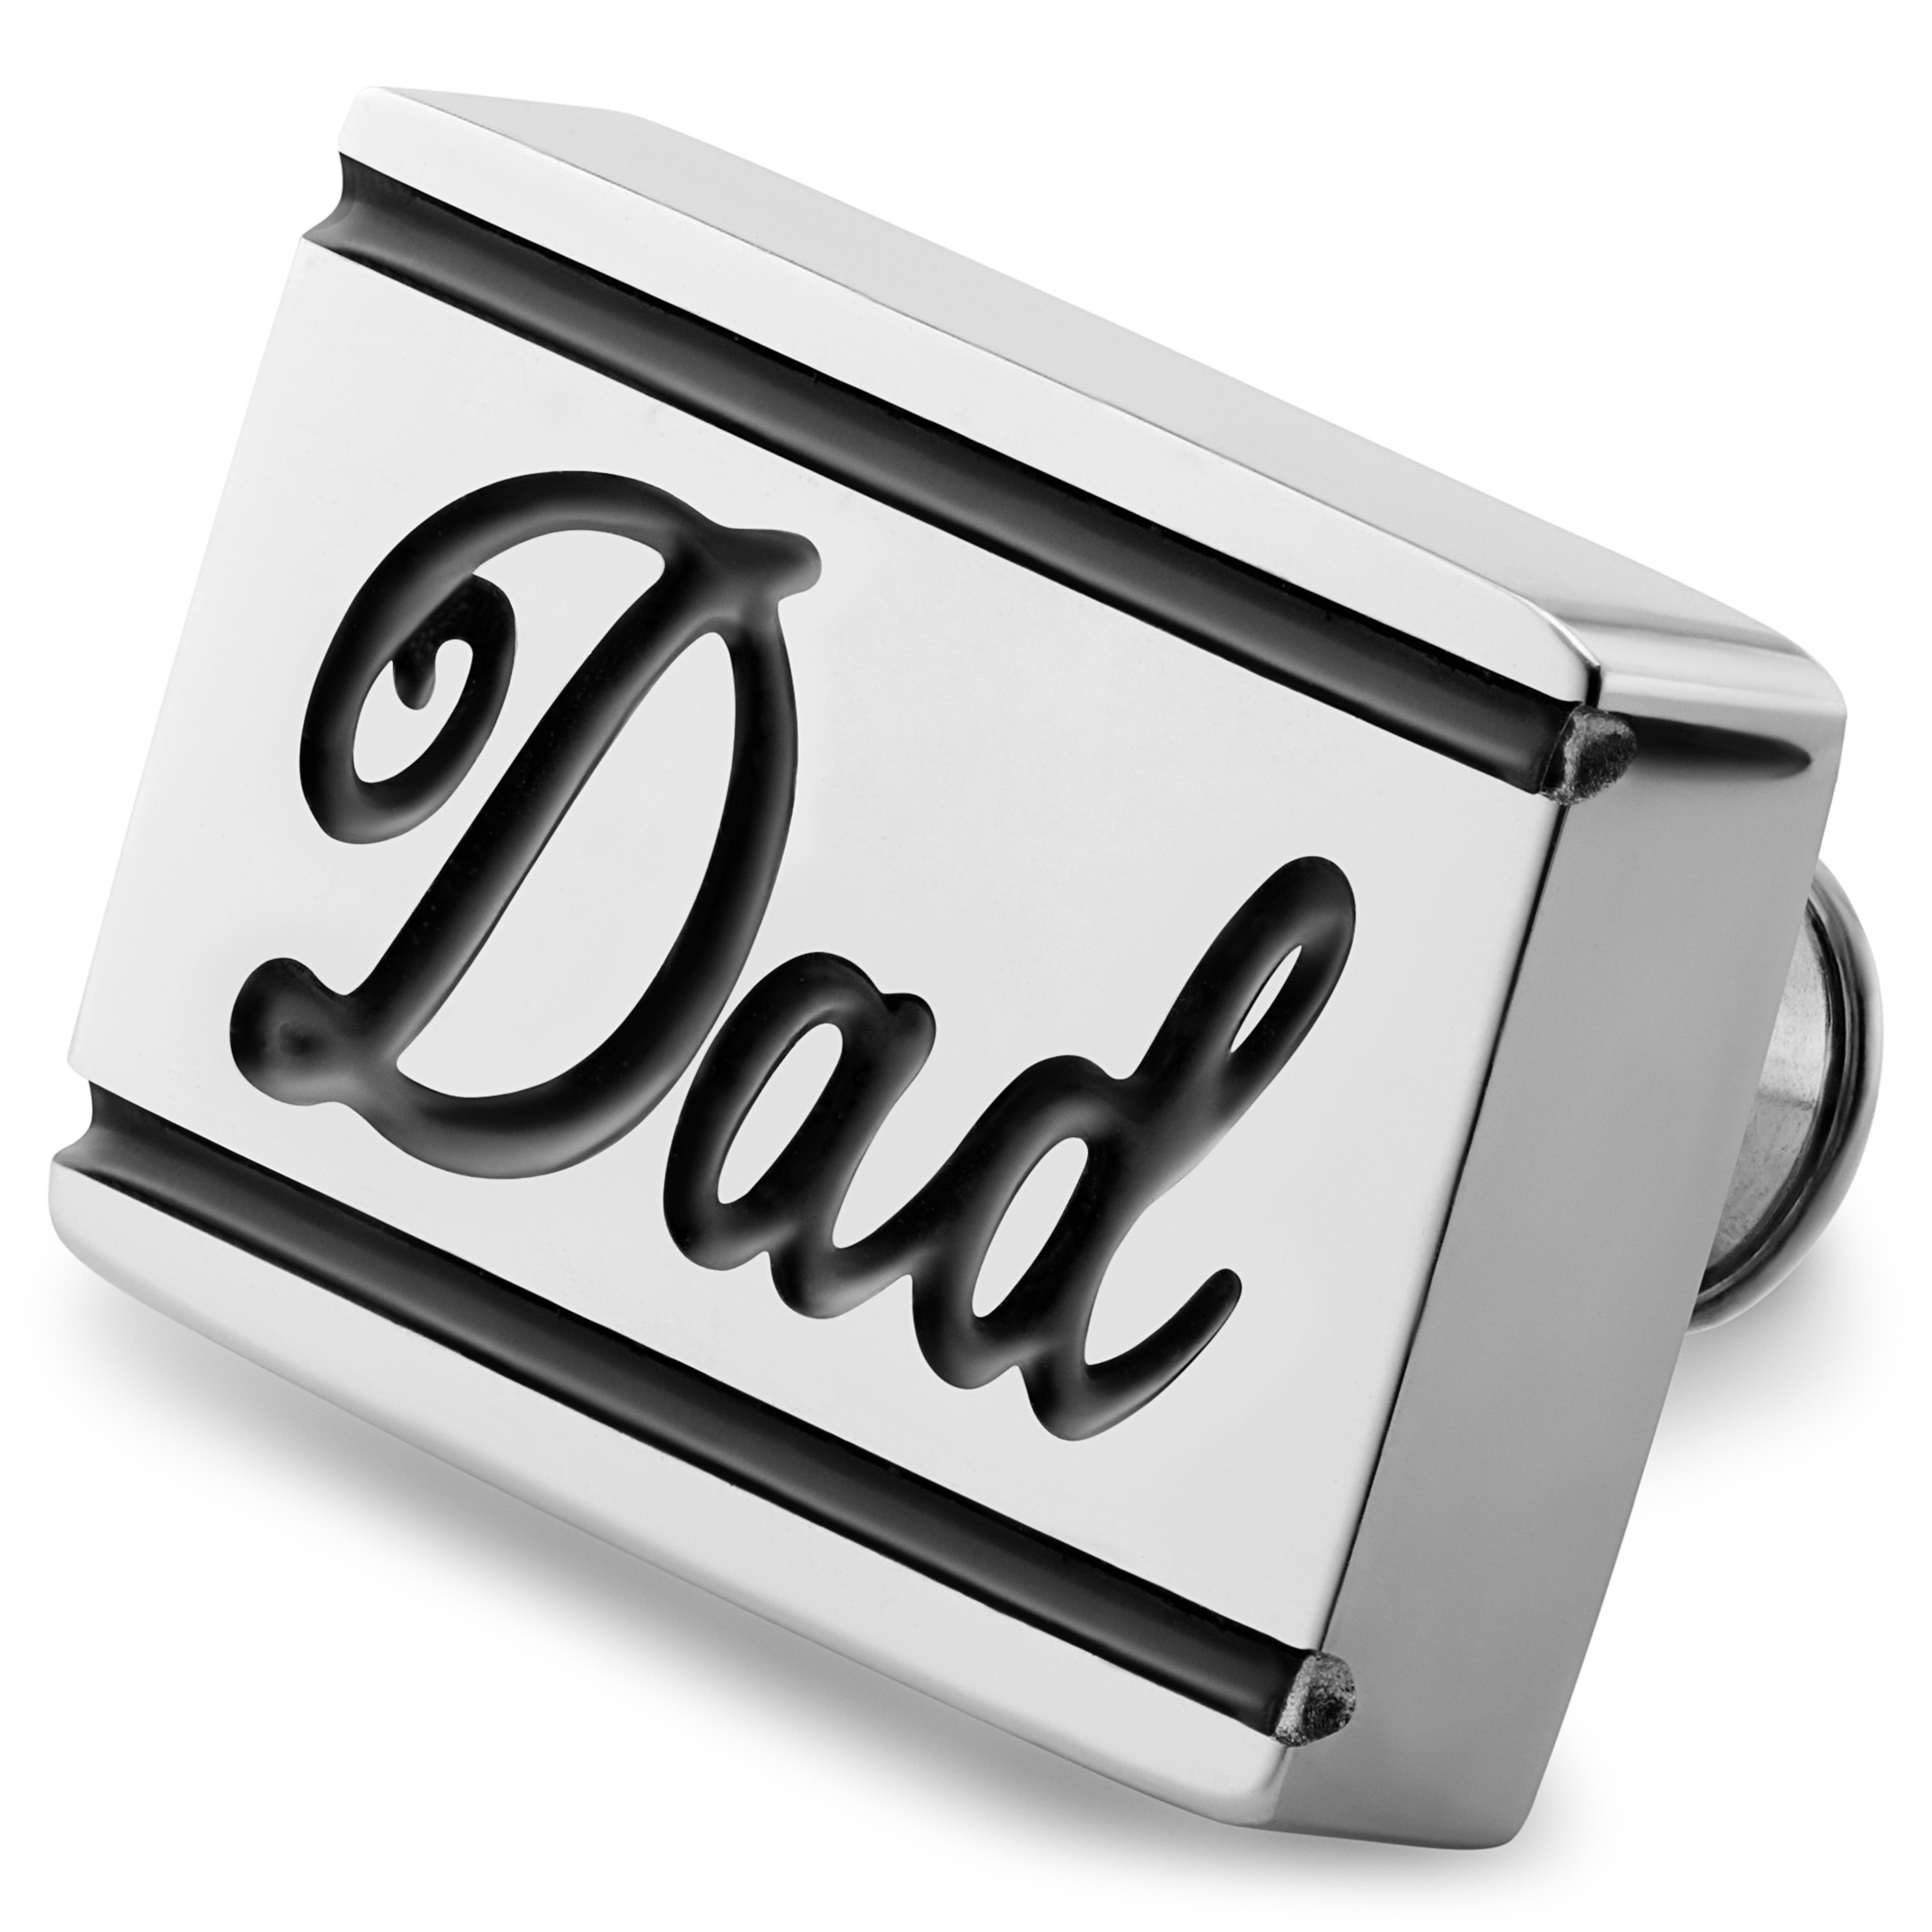 Silver-tone Stainless Steel Dad Watch Charm